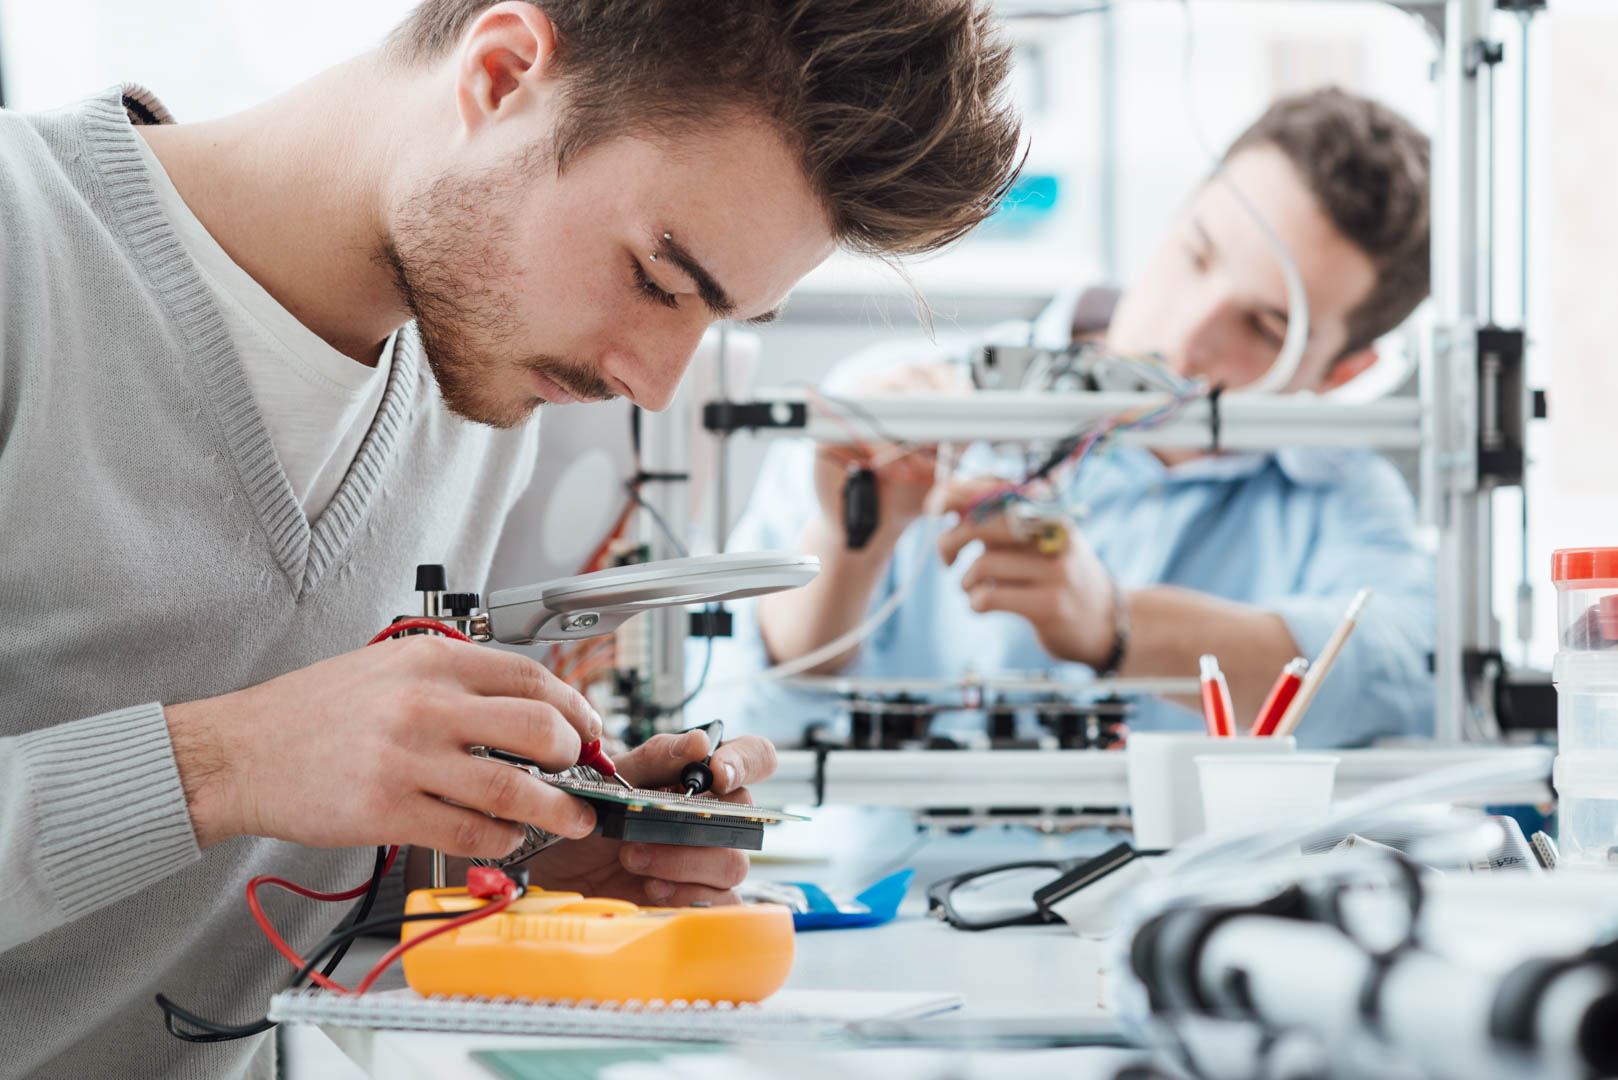 Engineering students working in the lab, a student is using a voltage and current tester, another student in the background is using a 3D printer